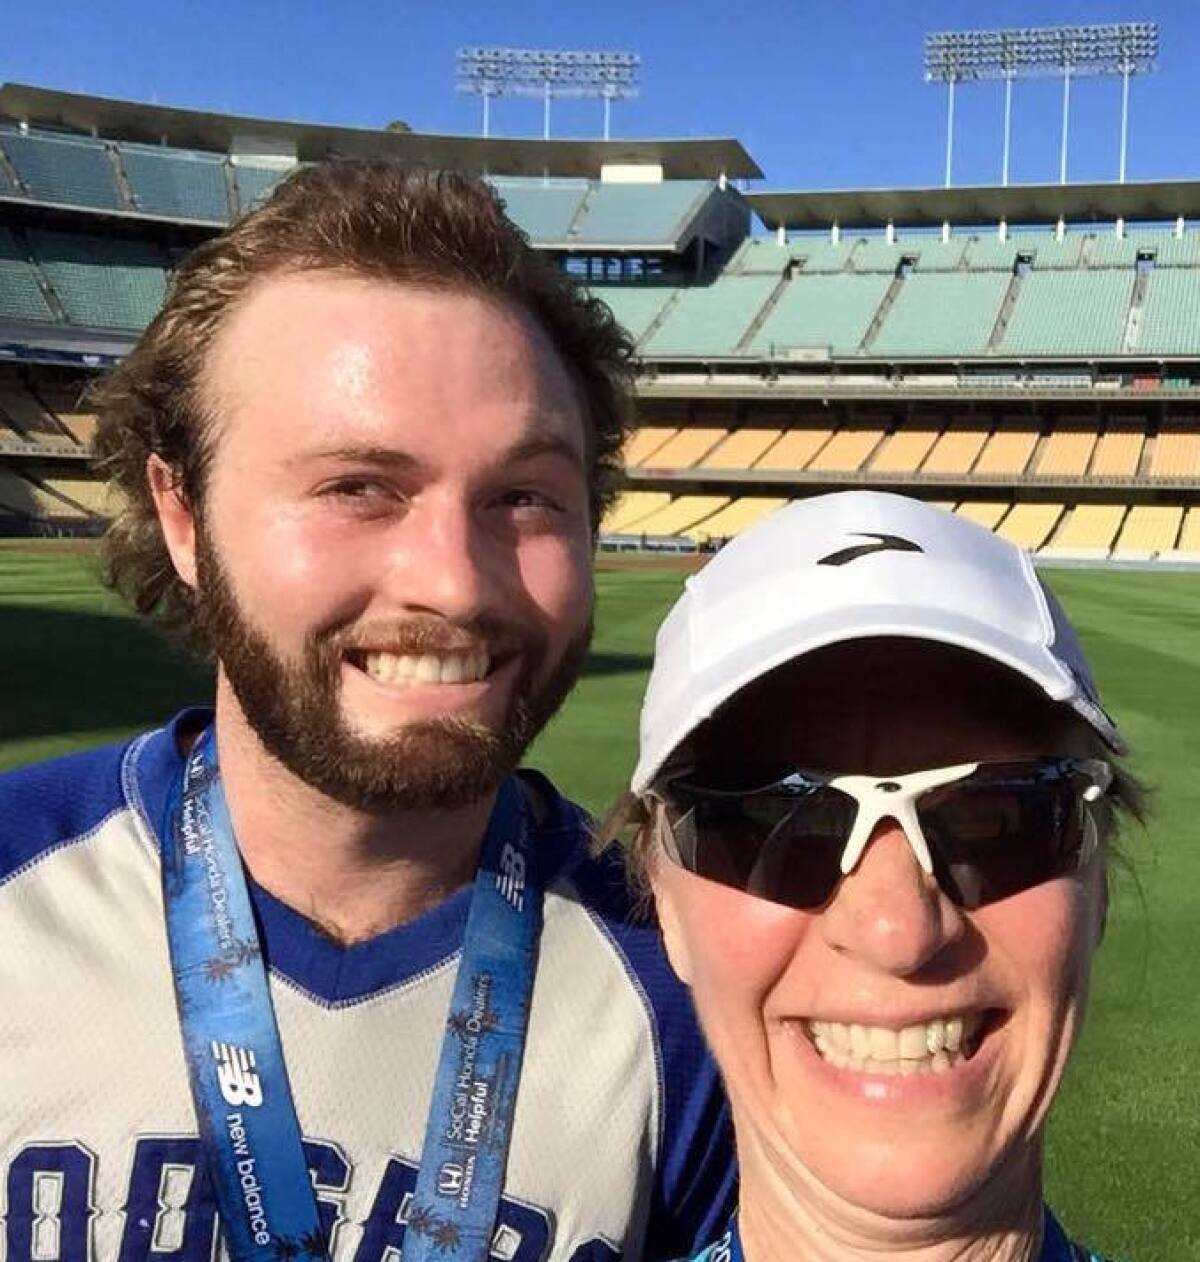 Benjamin David Hillman poses with his mother, Nadia Lindstrom Hillman, after completing the Dodgers 10K run.